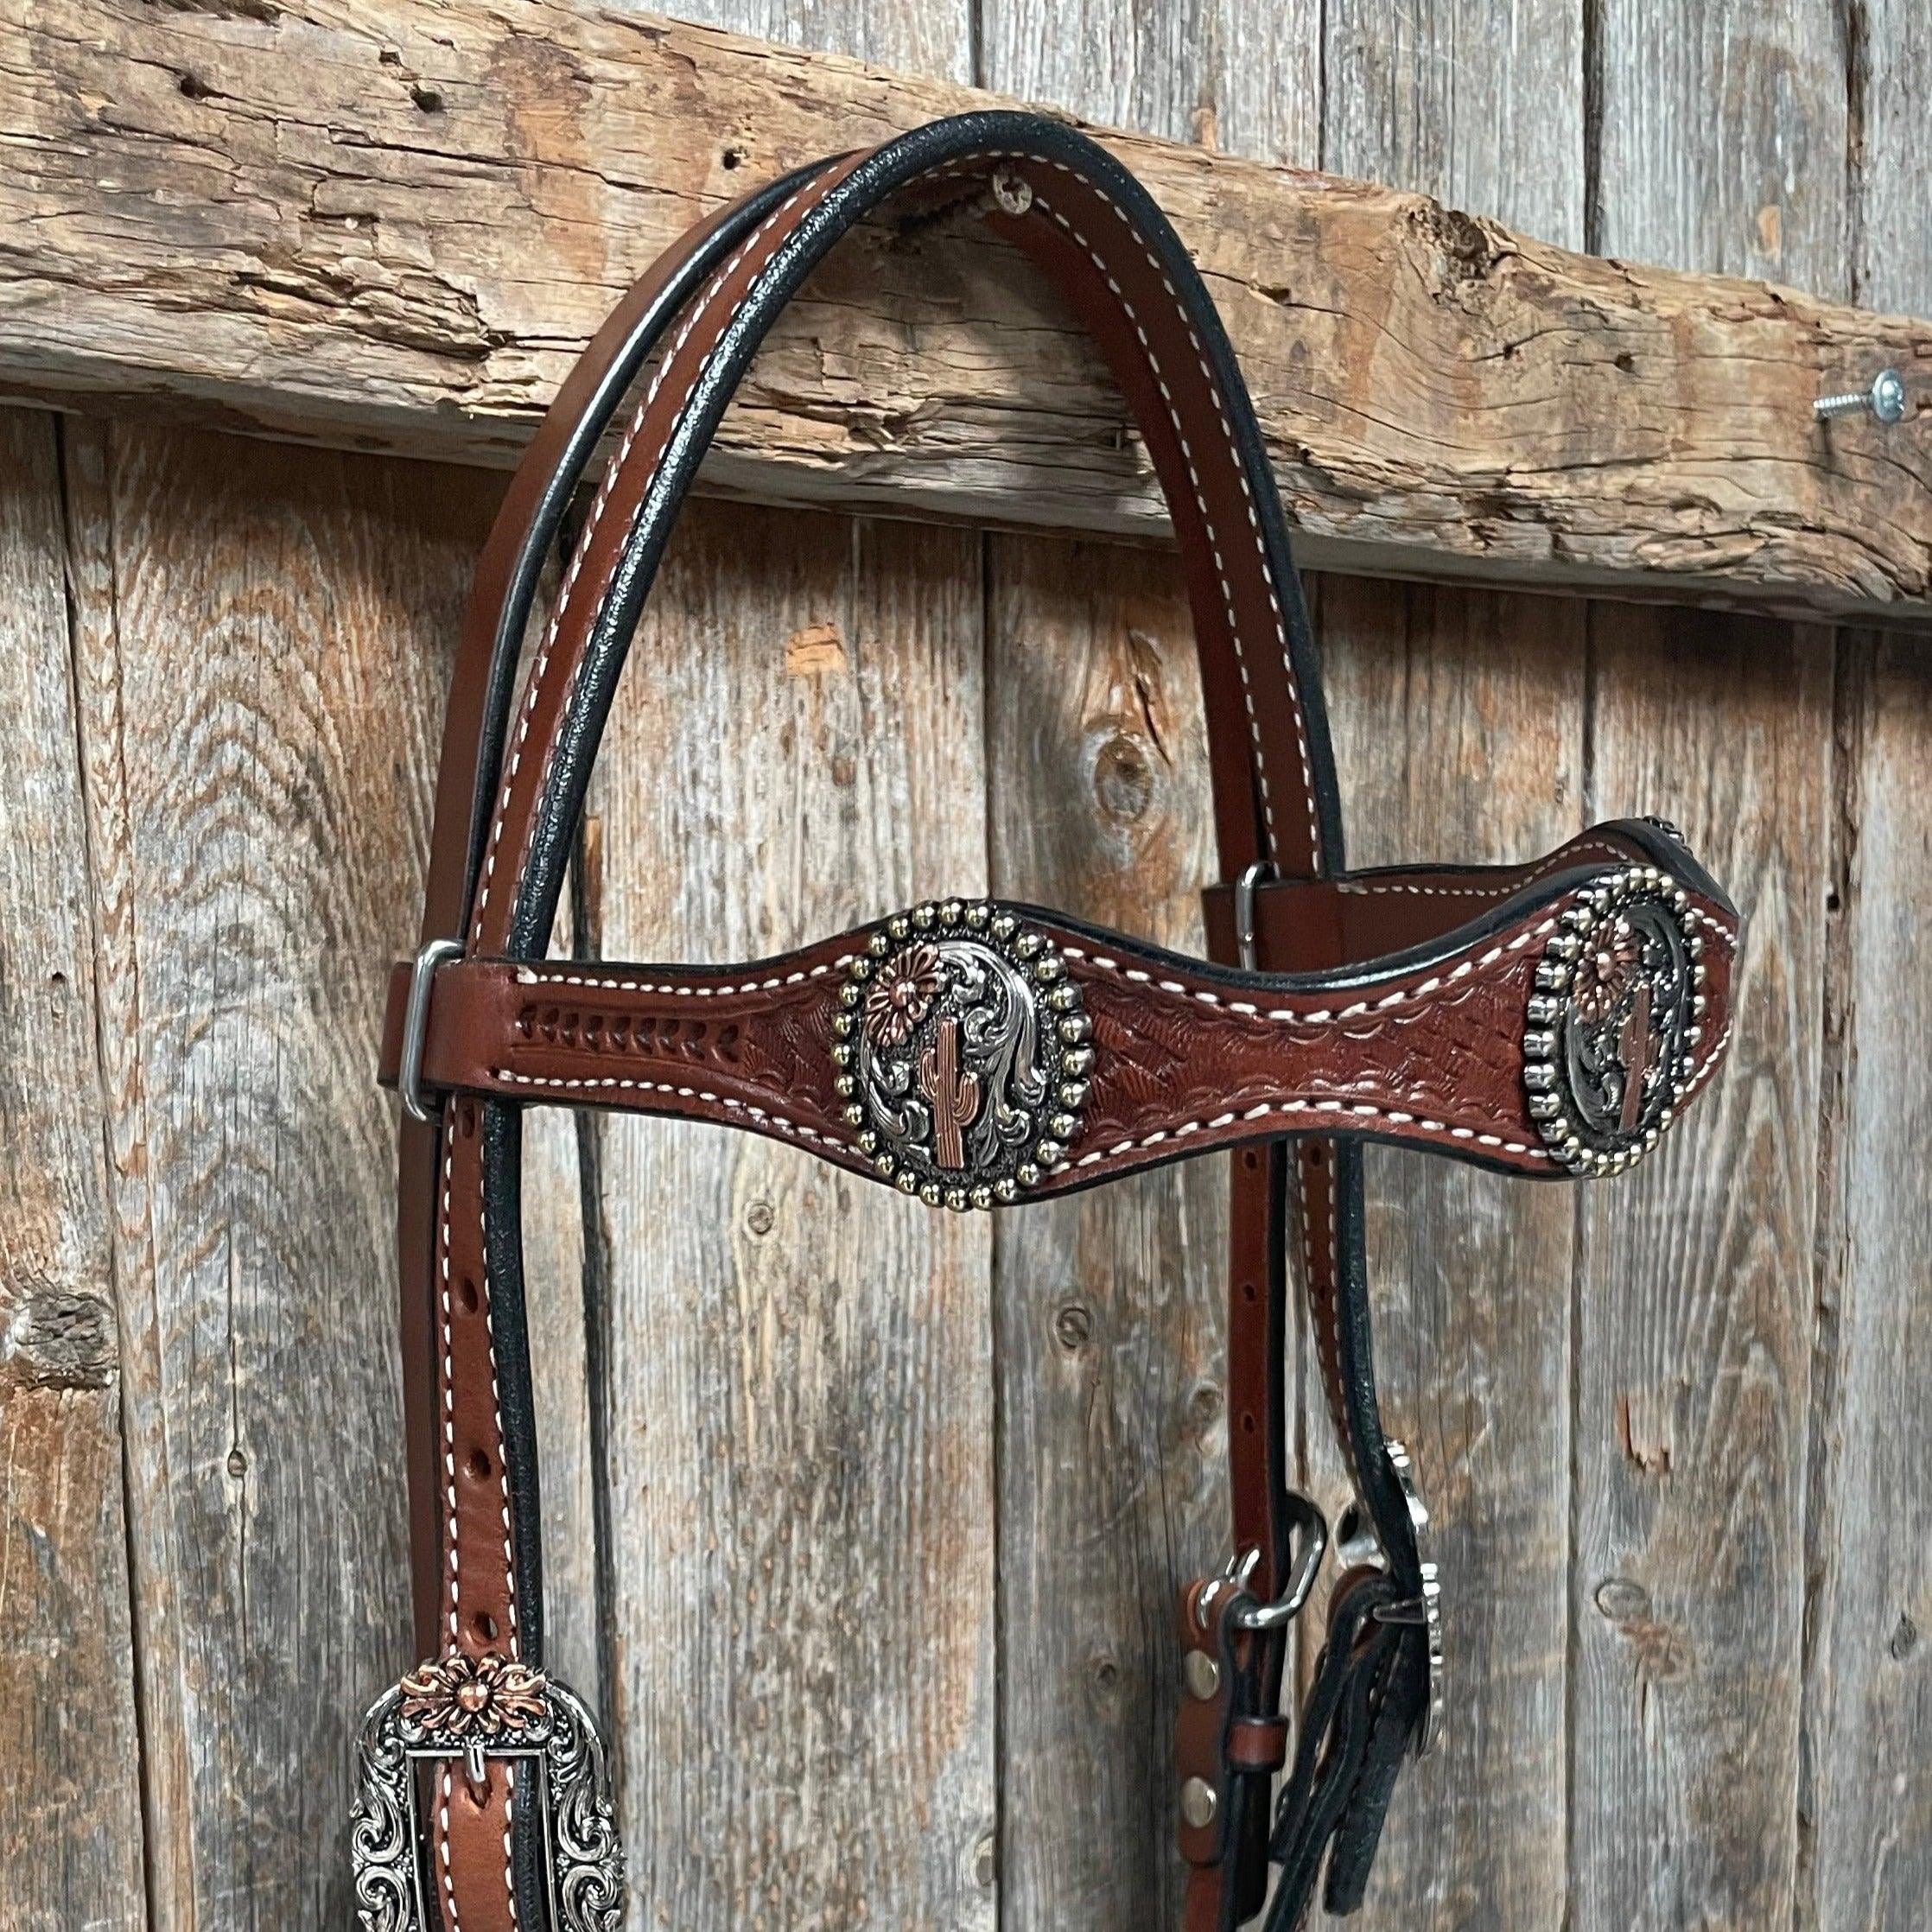 Medium Oil Basketweave Flower and Cactus Browband/One Ear Tack Set #BBBC491 - RODEO DRIVE